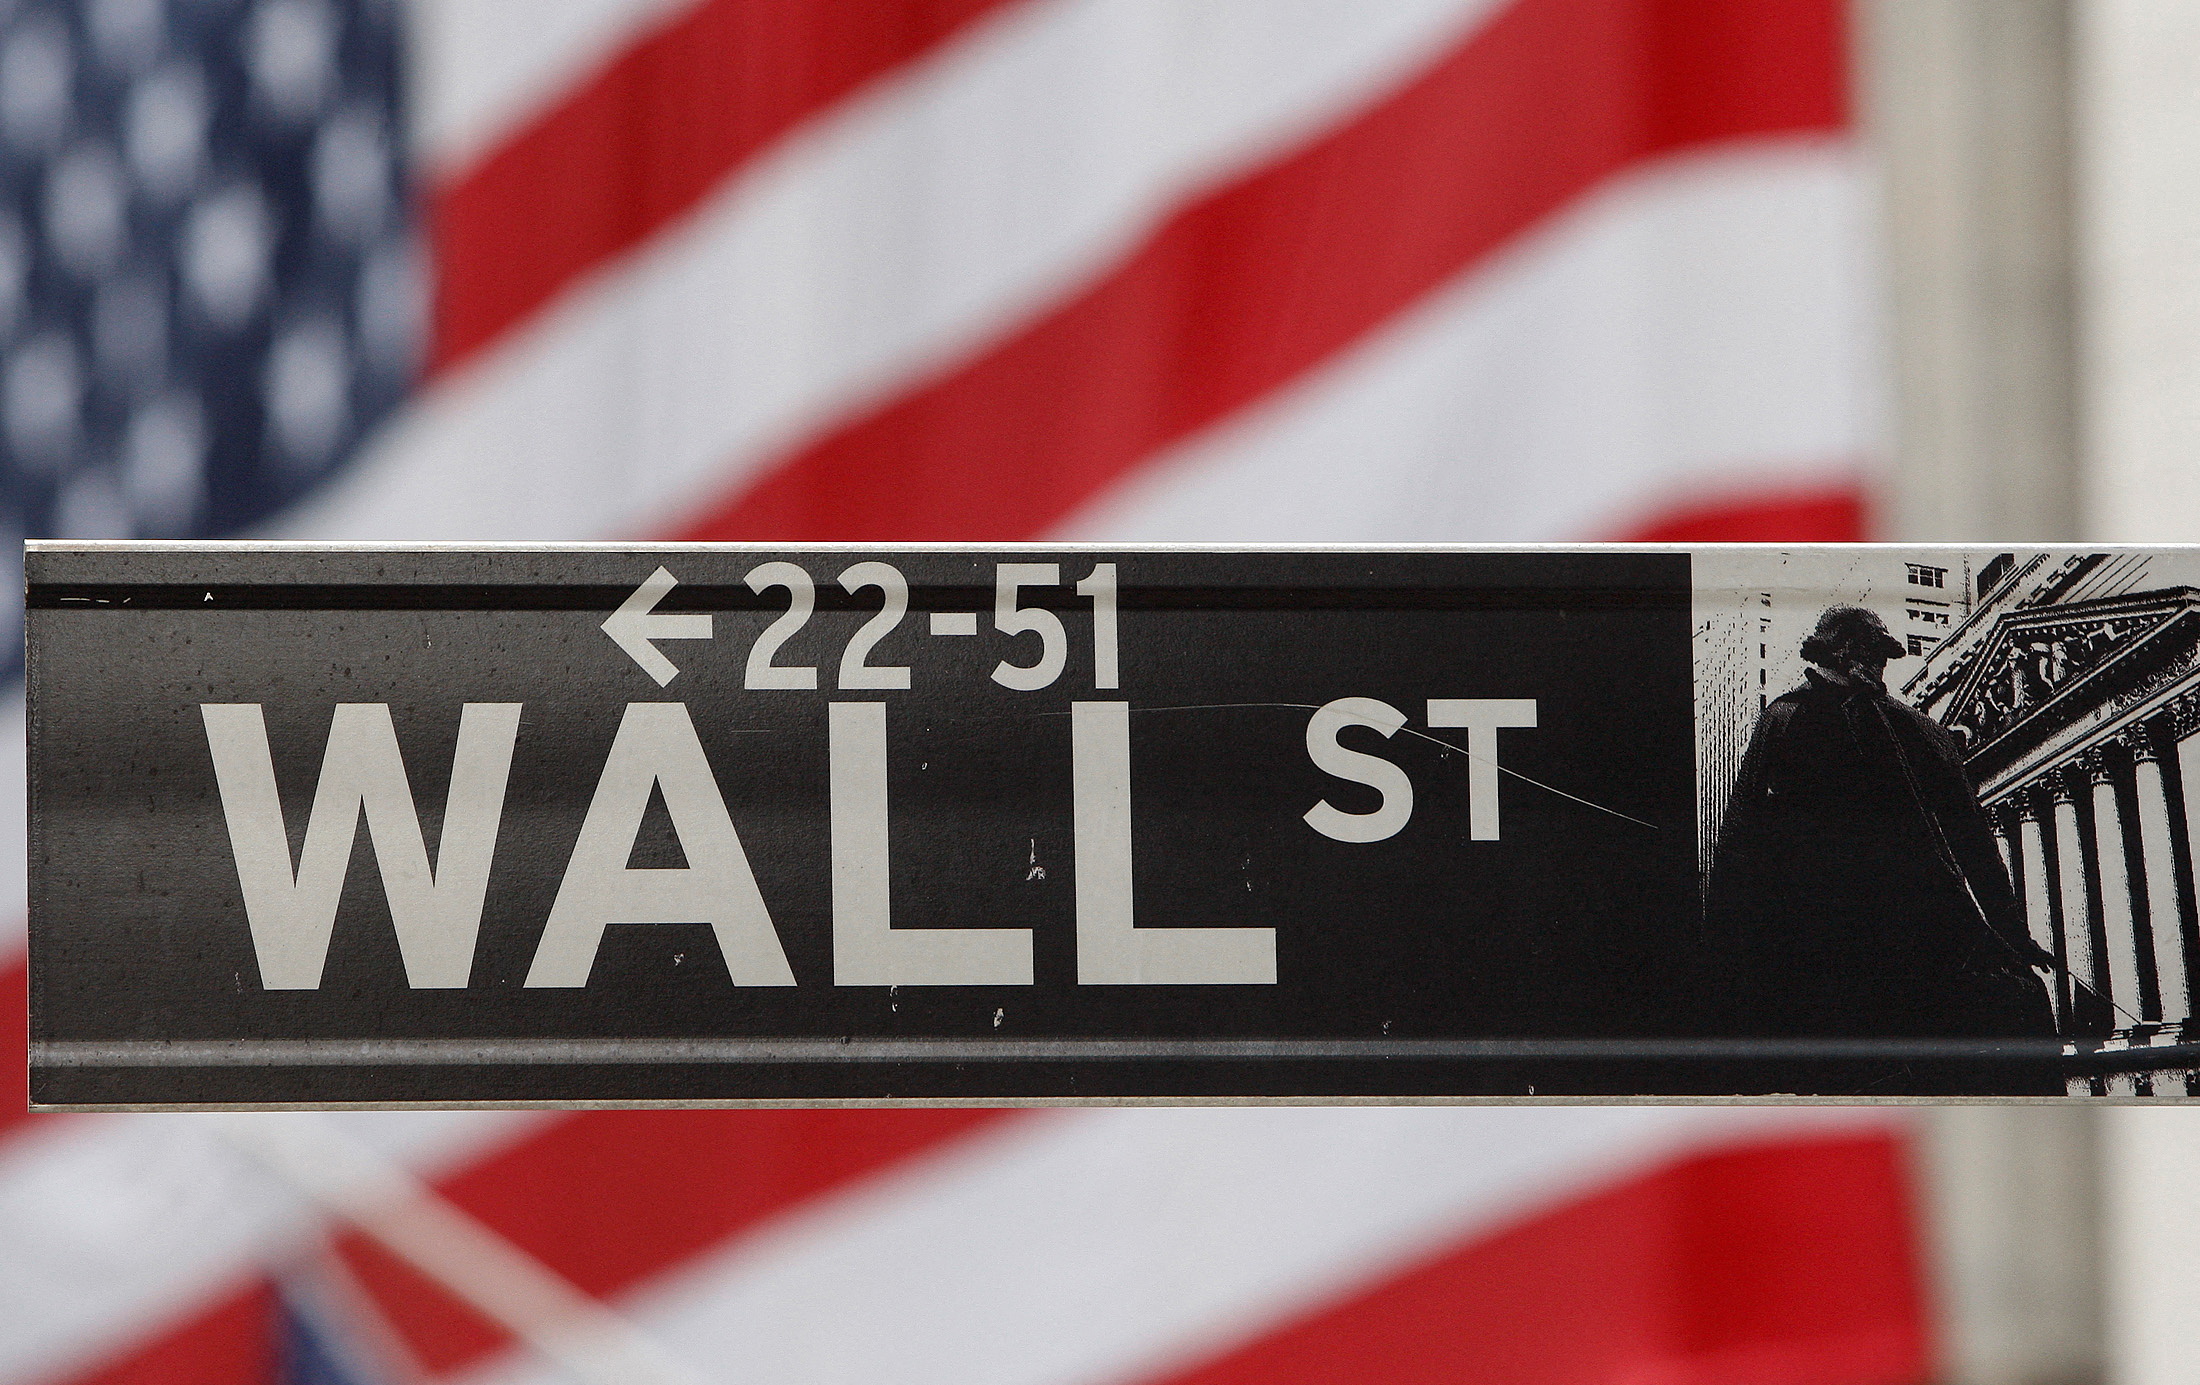 The Wall Street sign is seen in front of the New York Stock Exchange January 22, 2008. REUTERS/Chip East